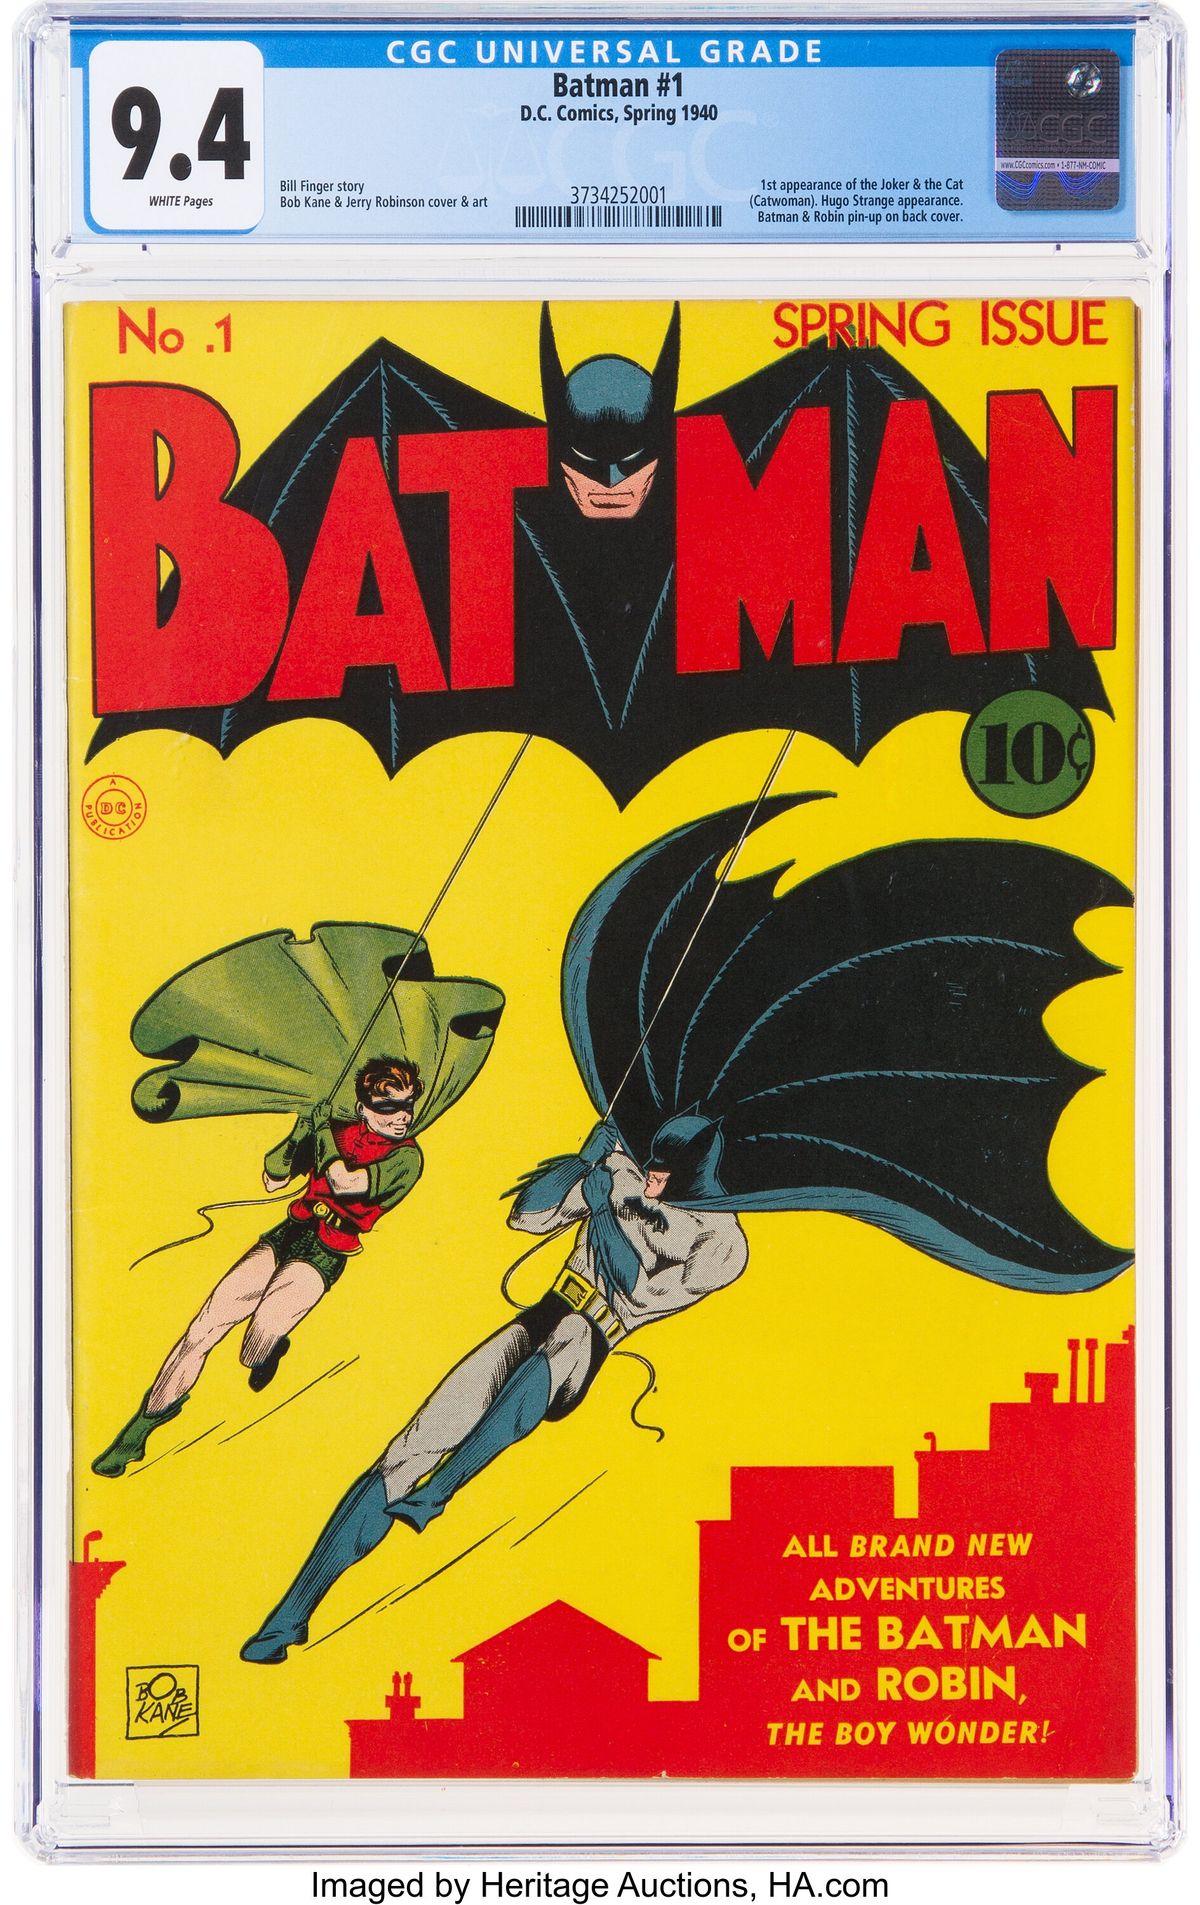 Holy hammer! Near mint copy of Batman #1 sells for record $2.2m at